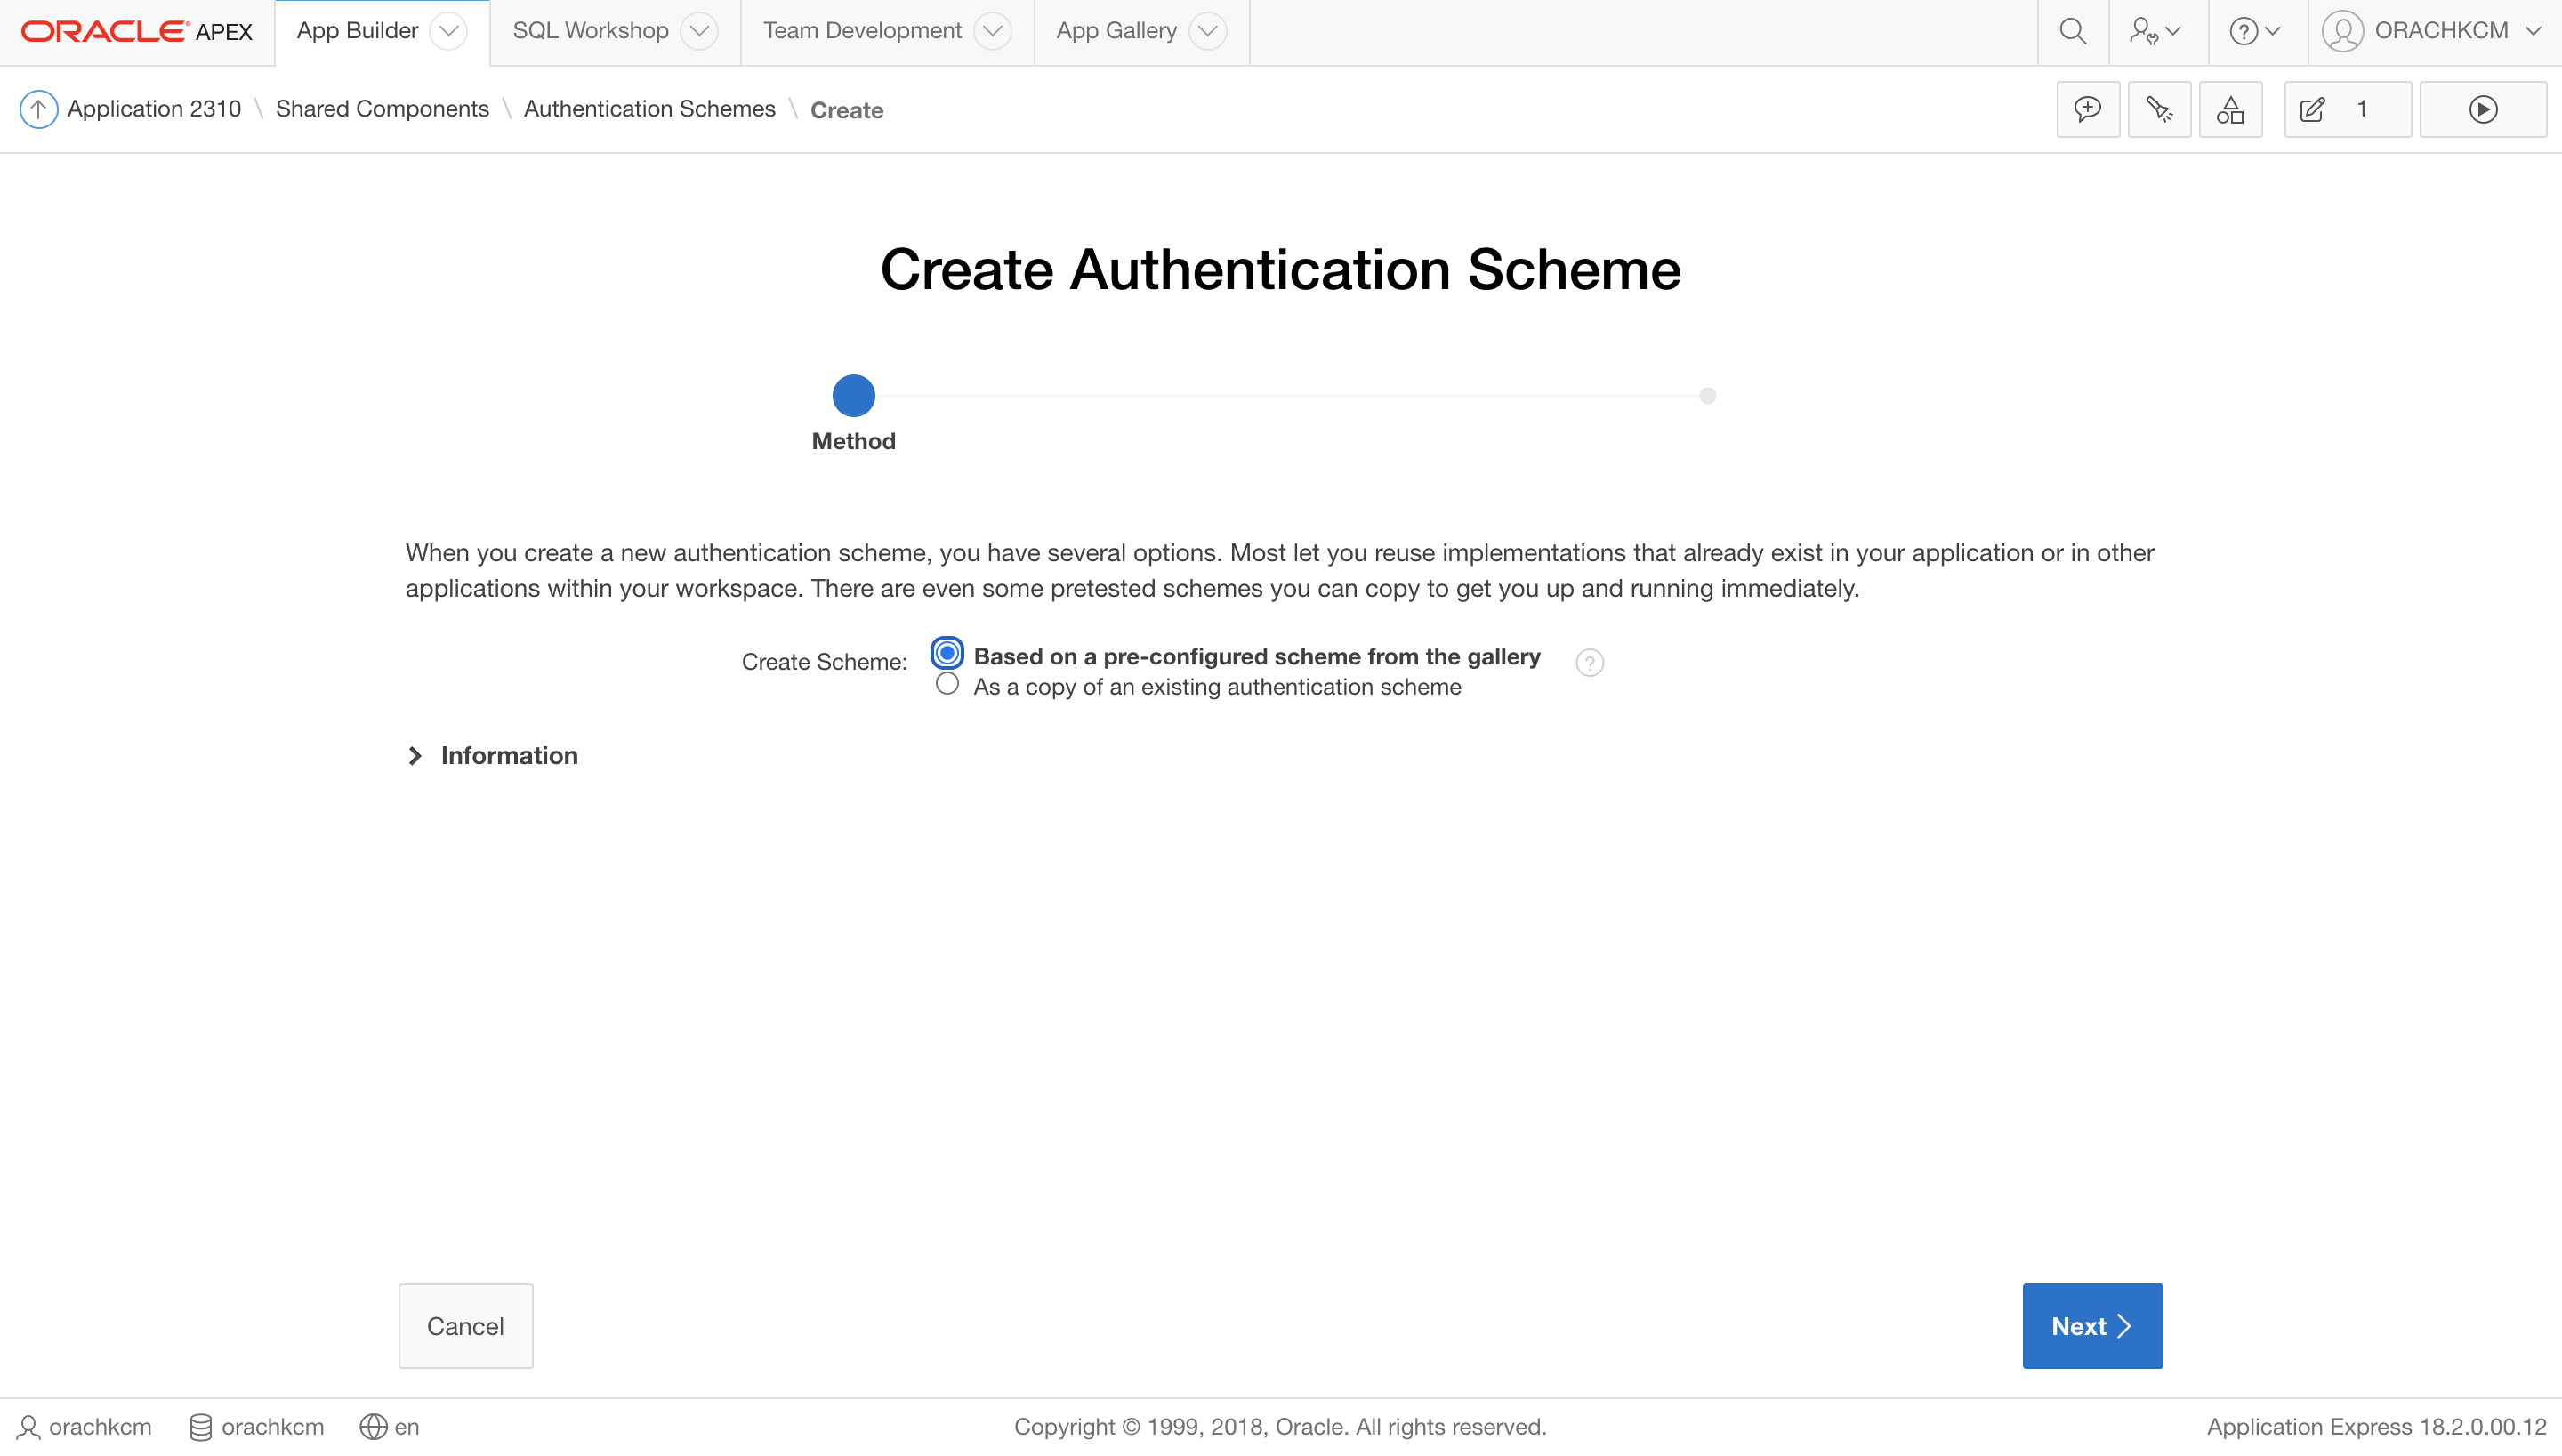 This image illustrates creating Authentication Schemes.